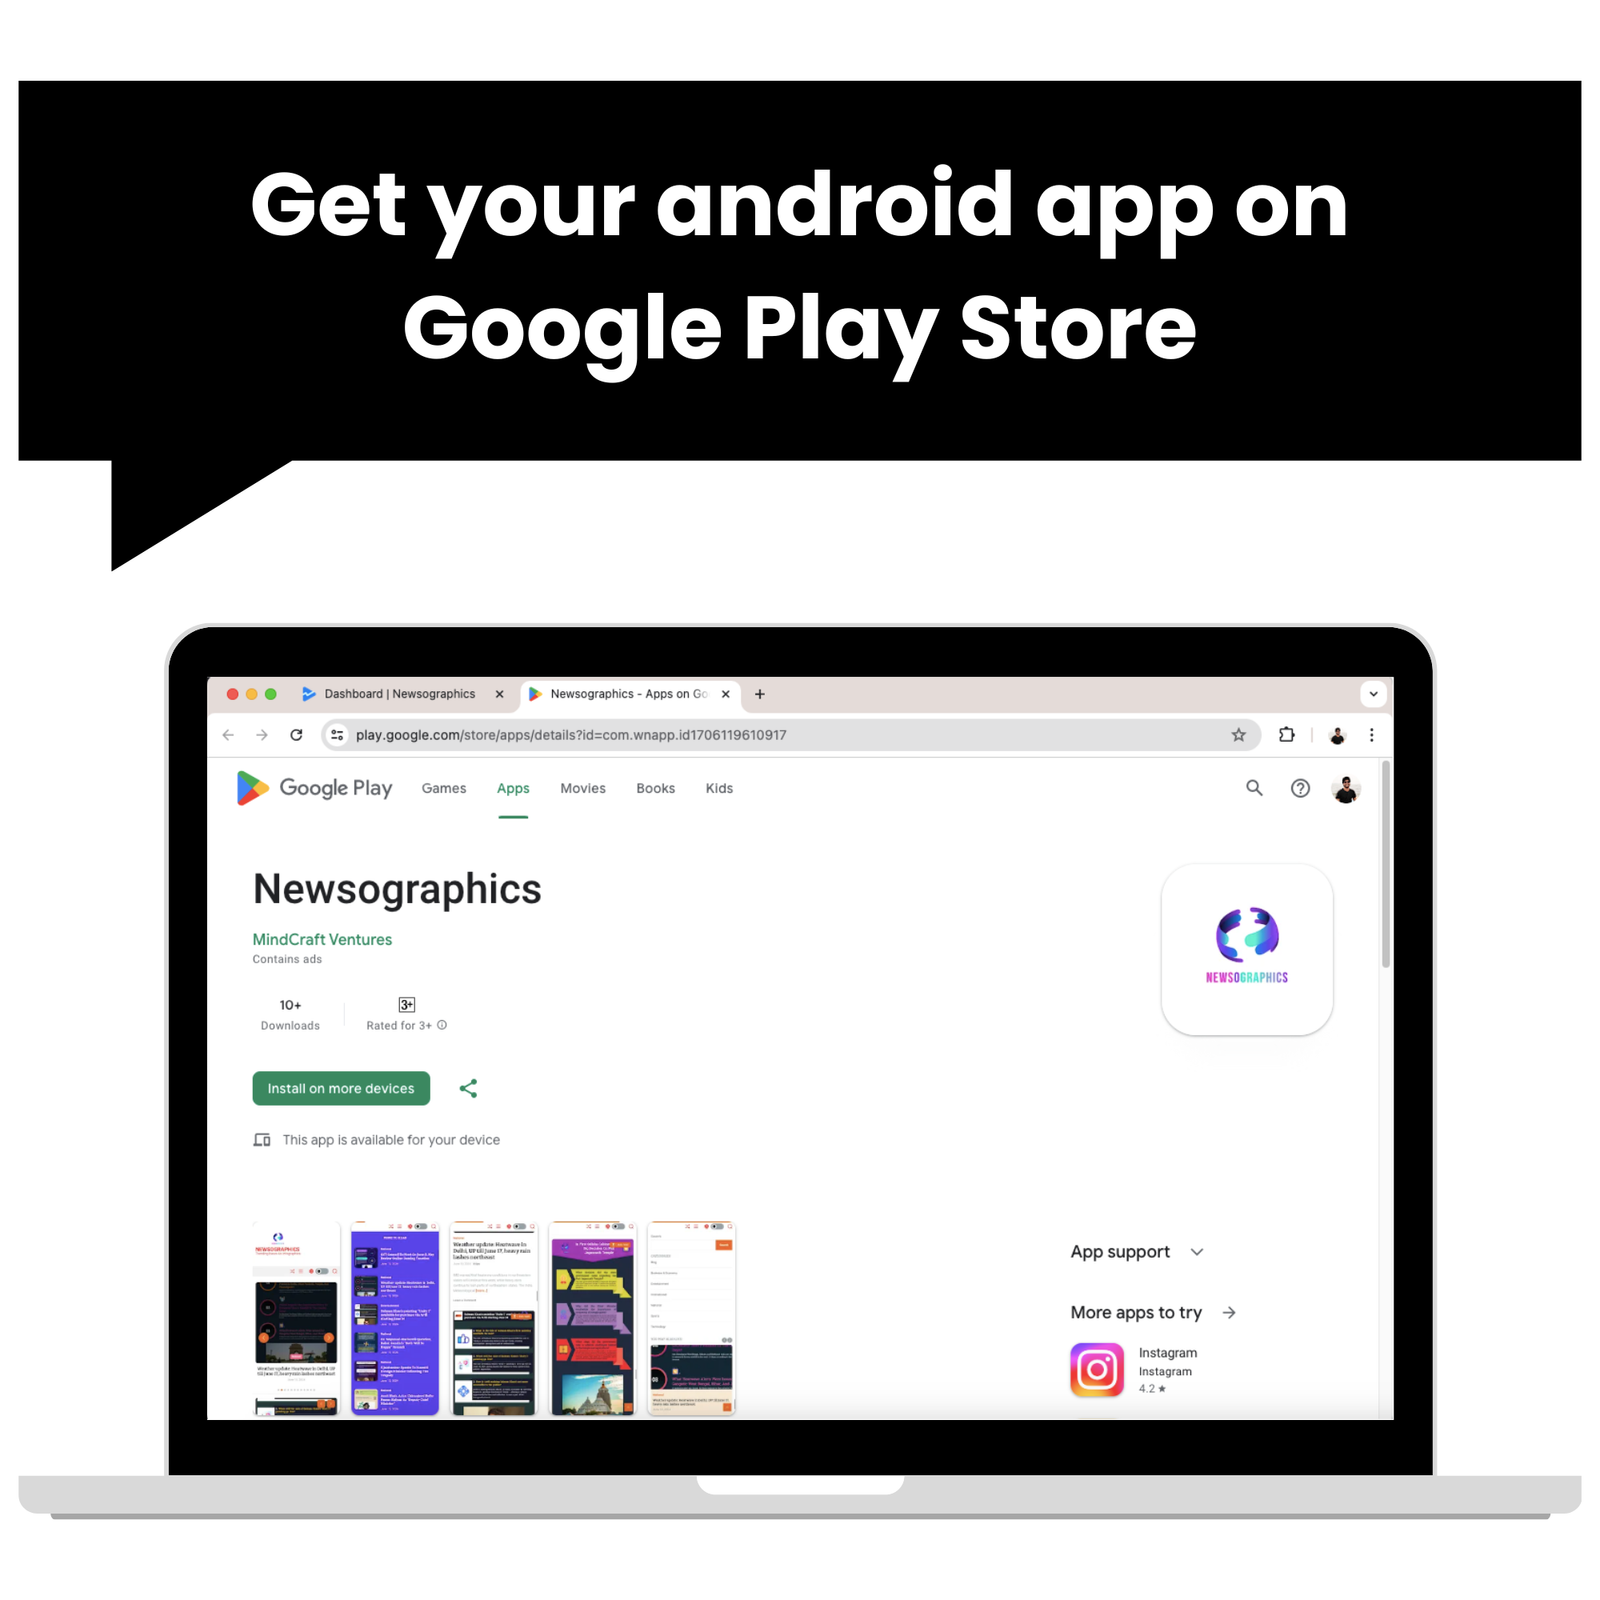 get your android app on Google Play Store